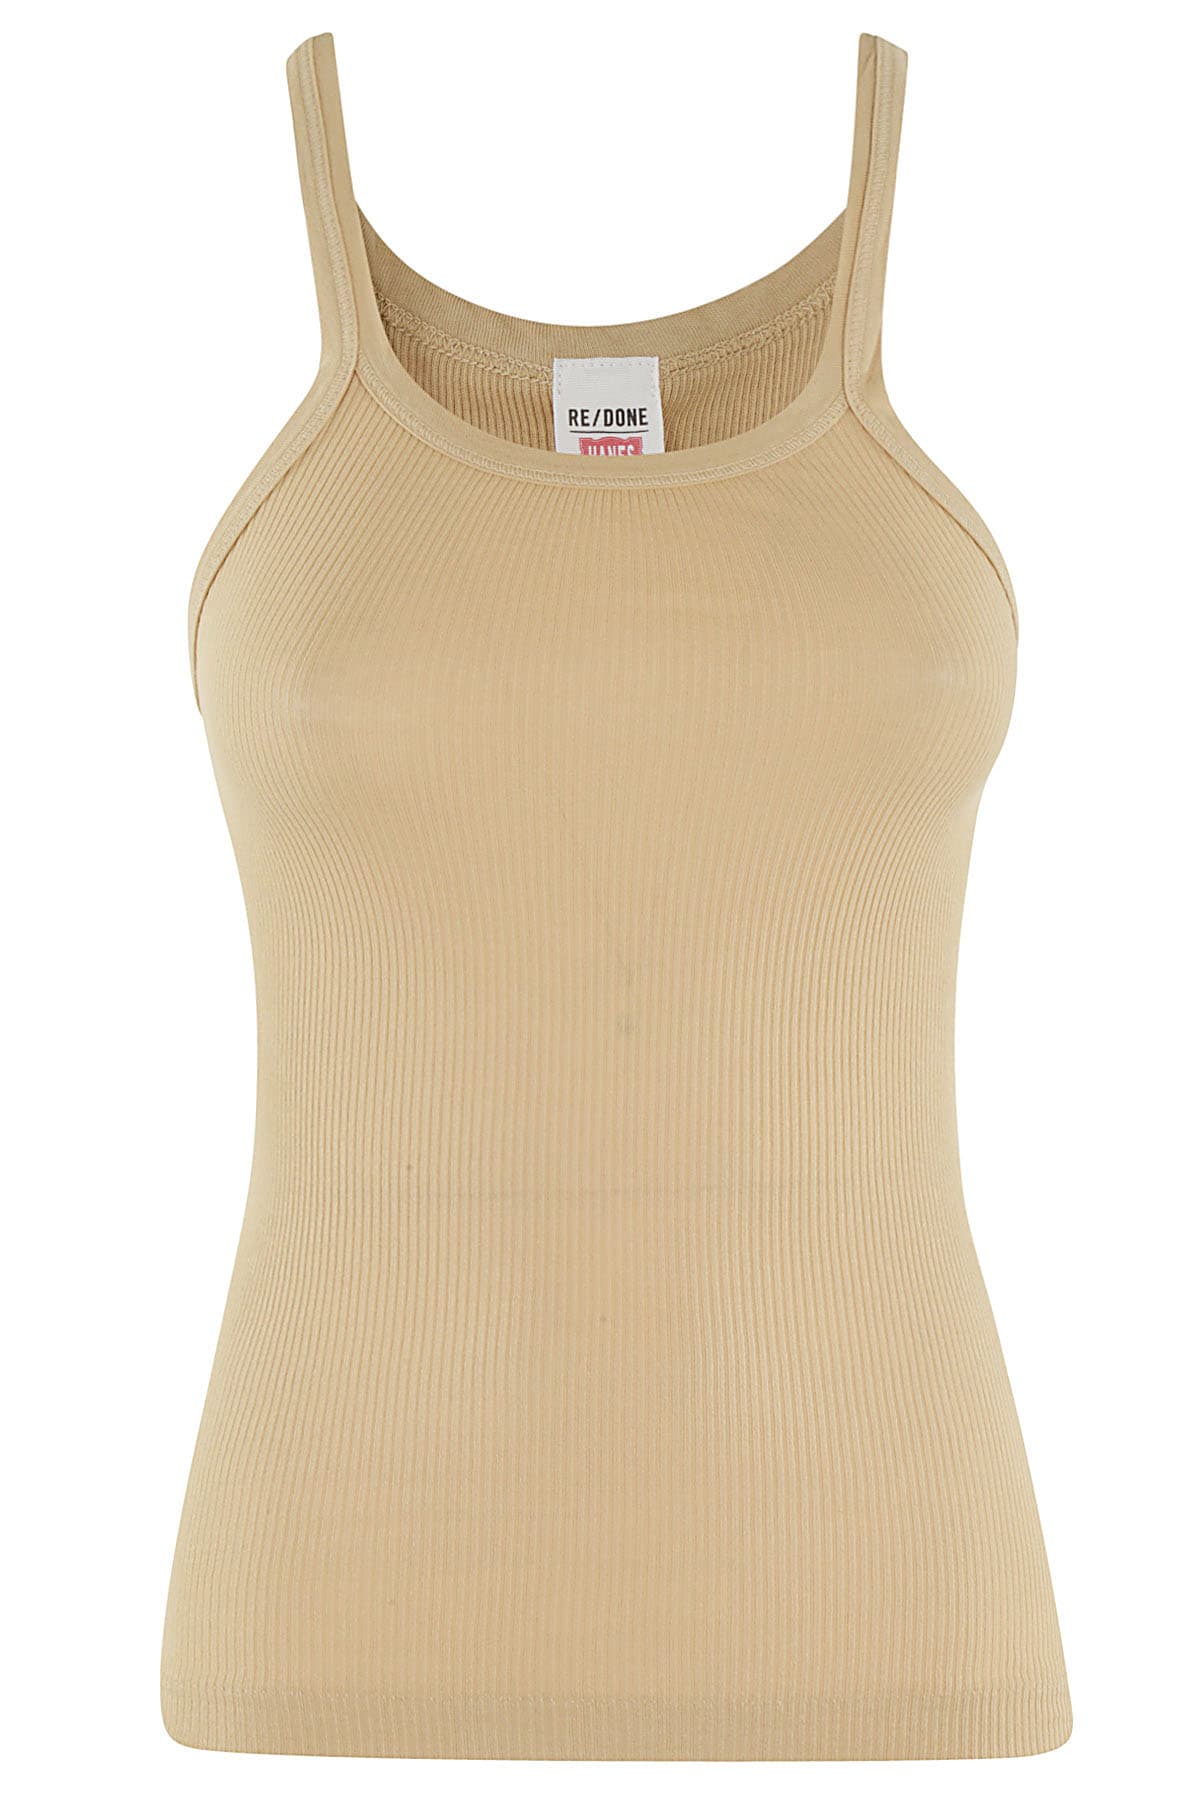 Re/done Ribbed Tank In Sand